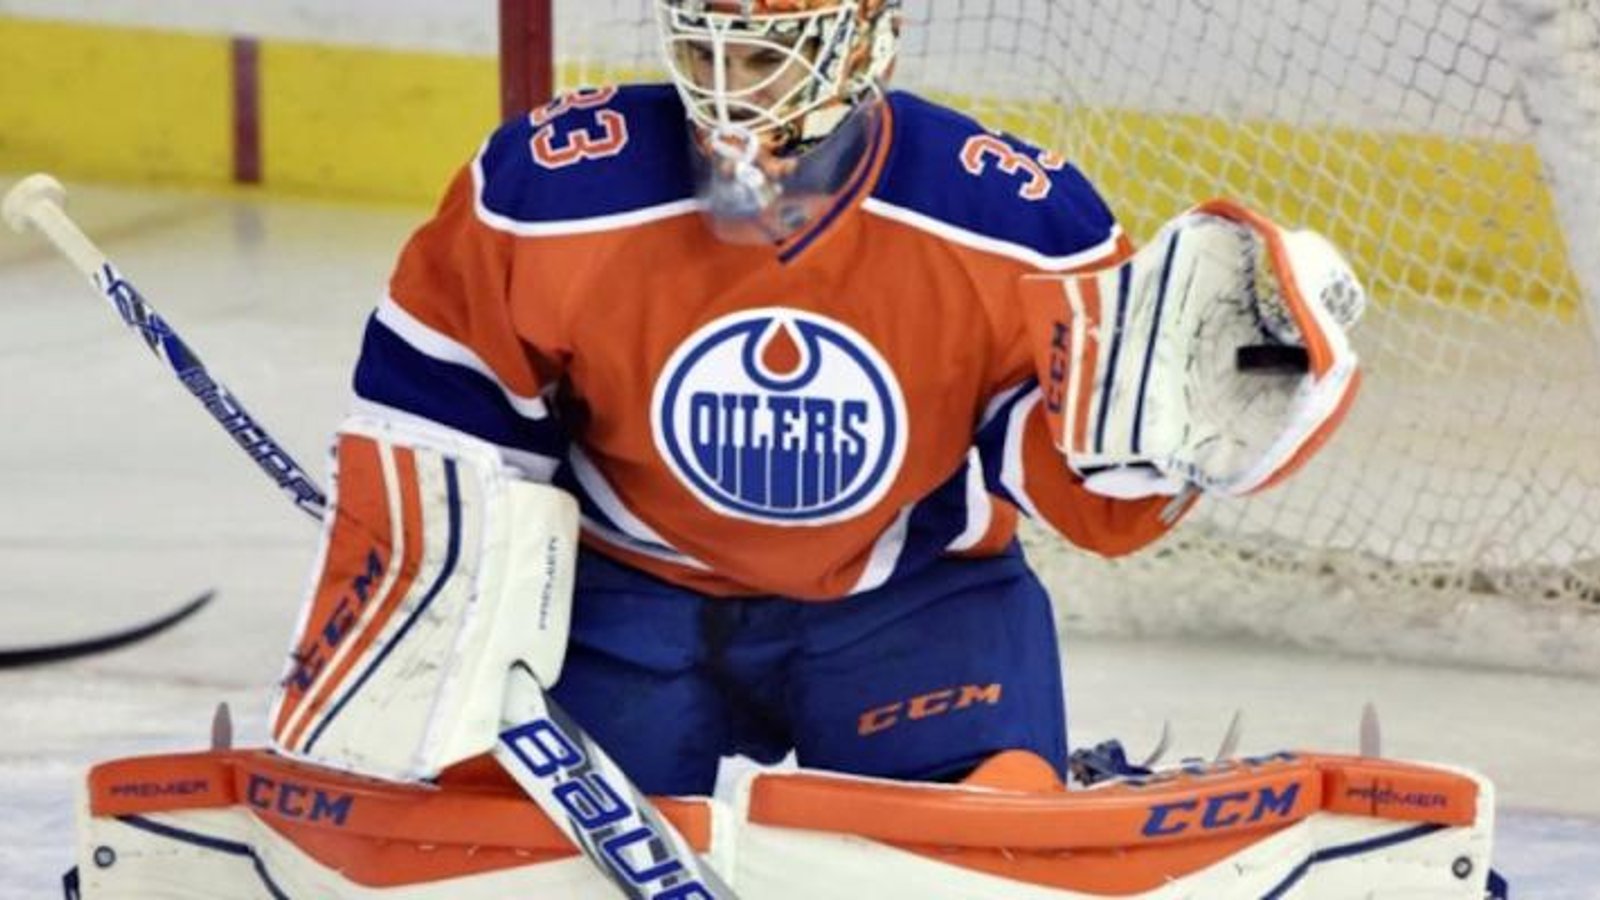 Must See: Cam Talbot's windmill glove save is one for the highlight films.